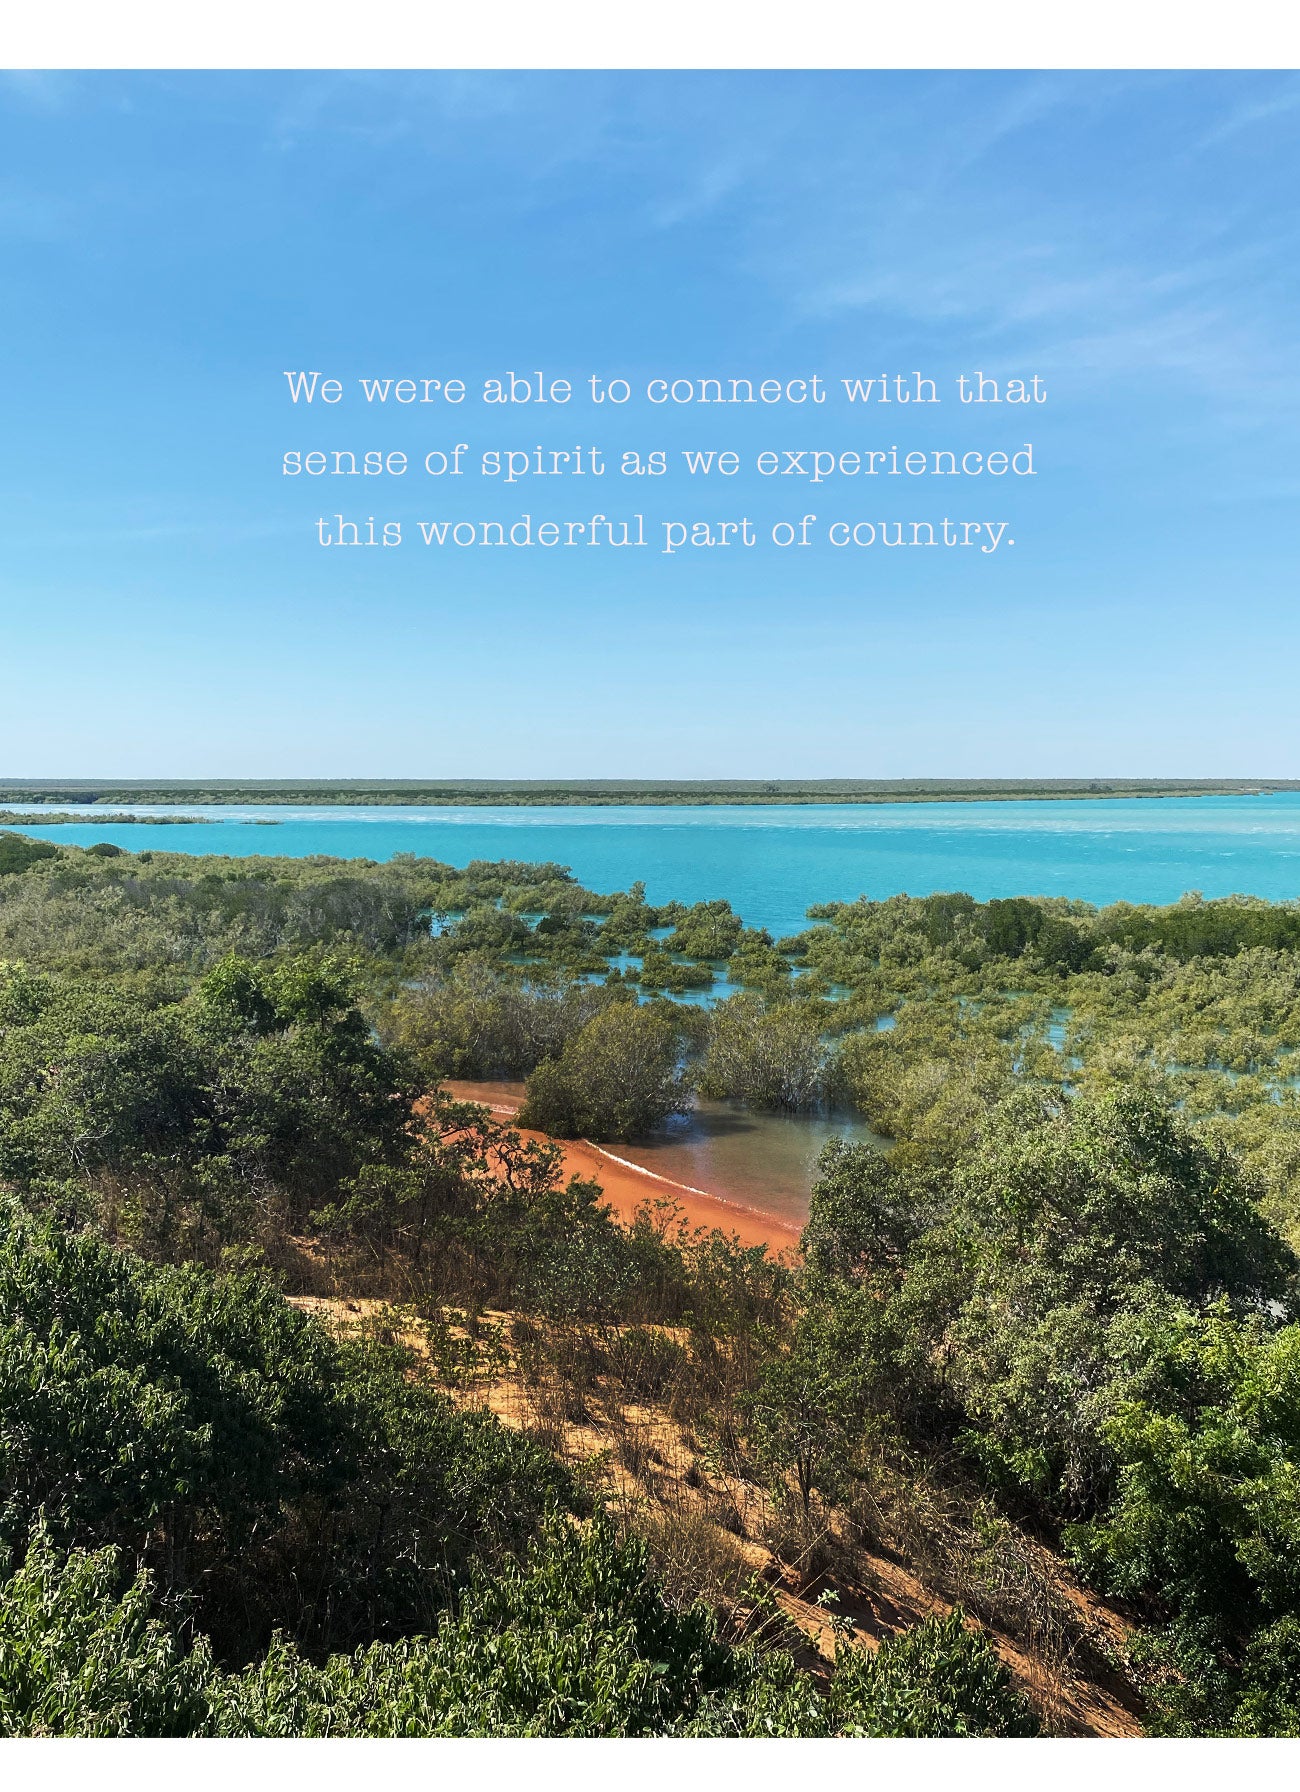 Connecting spiritually with country at Cape Leveque in Western Australia